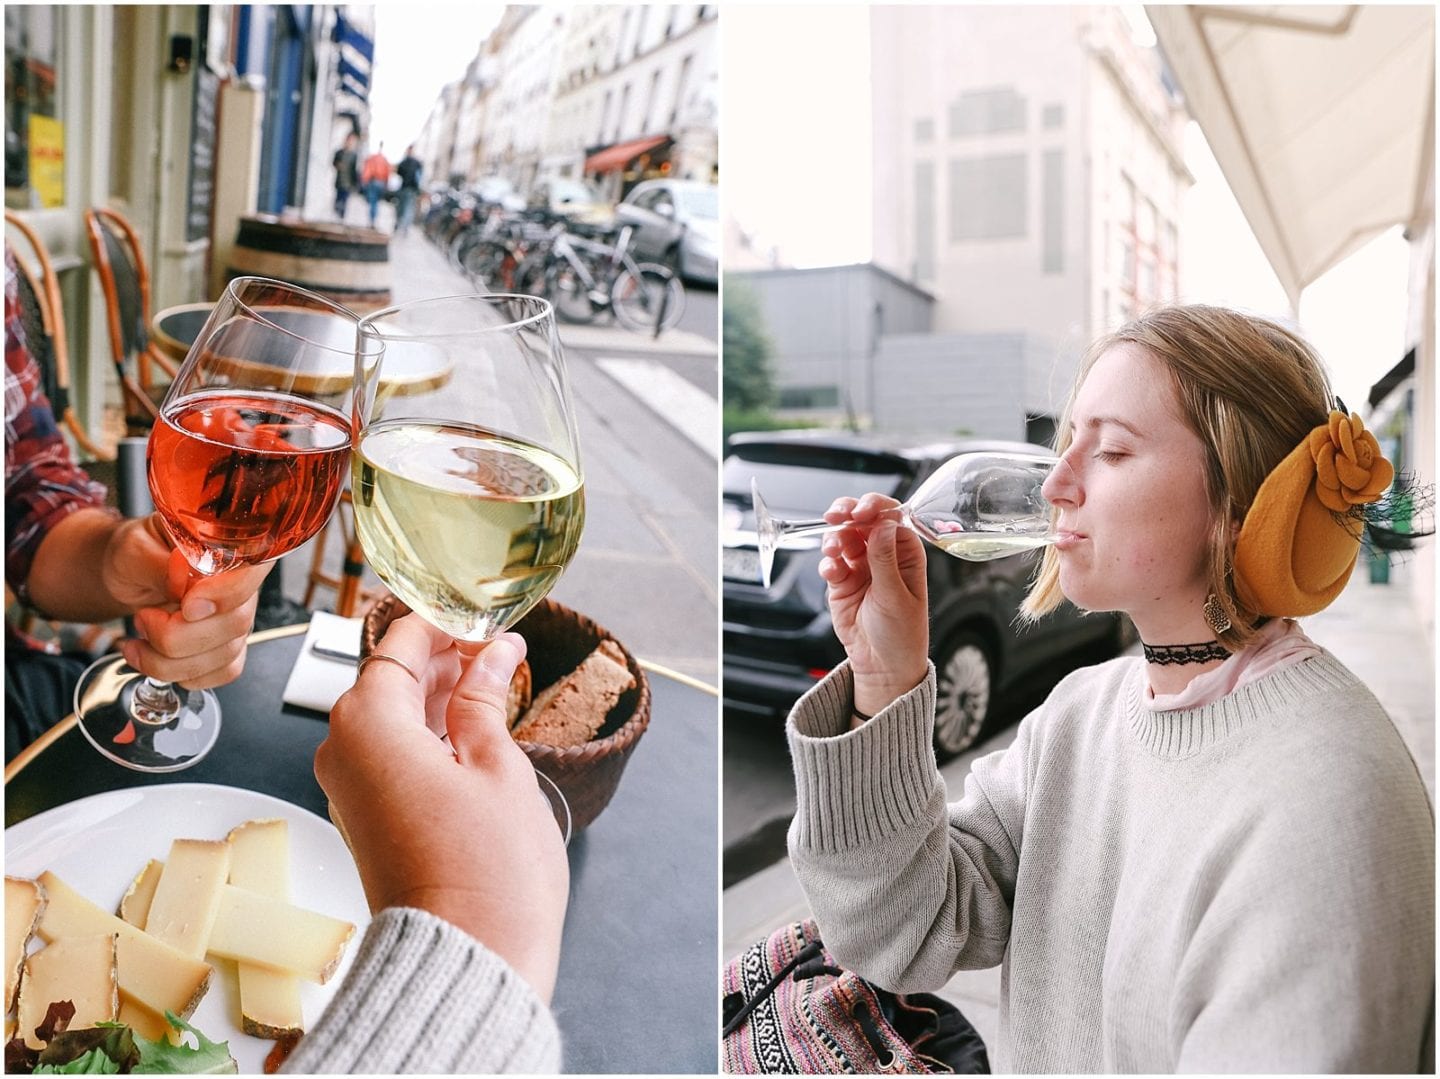 Photographer and blogger, Helena Woods at a cafe in Paris drinking wine